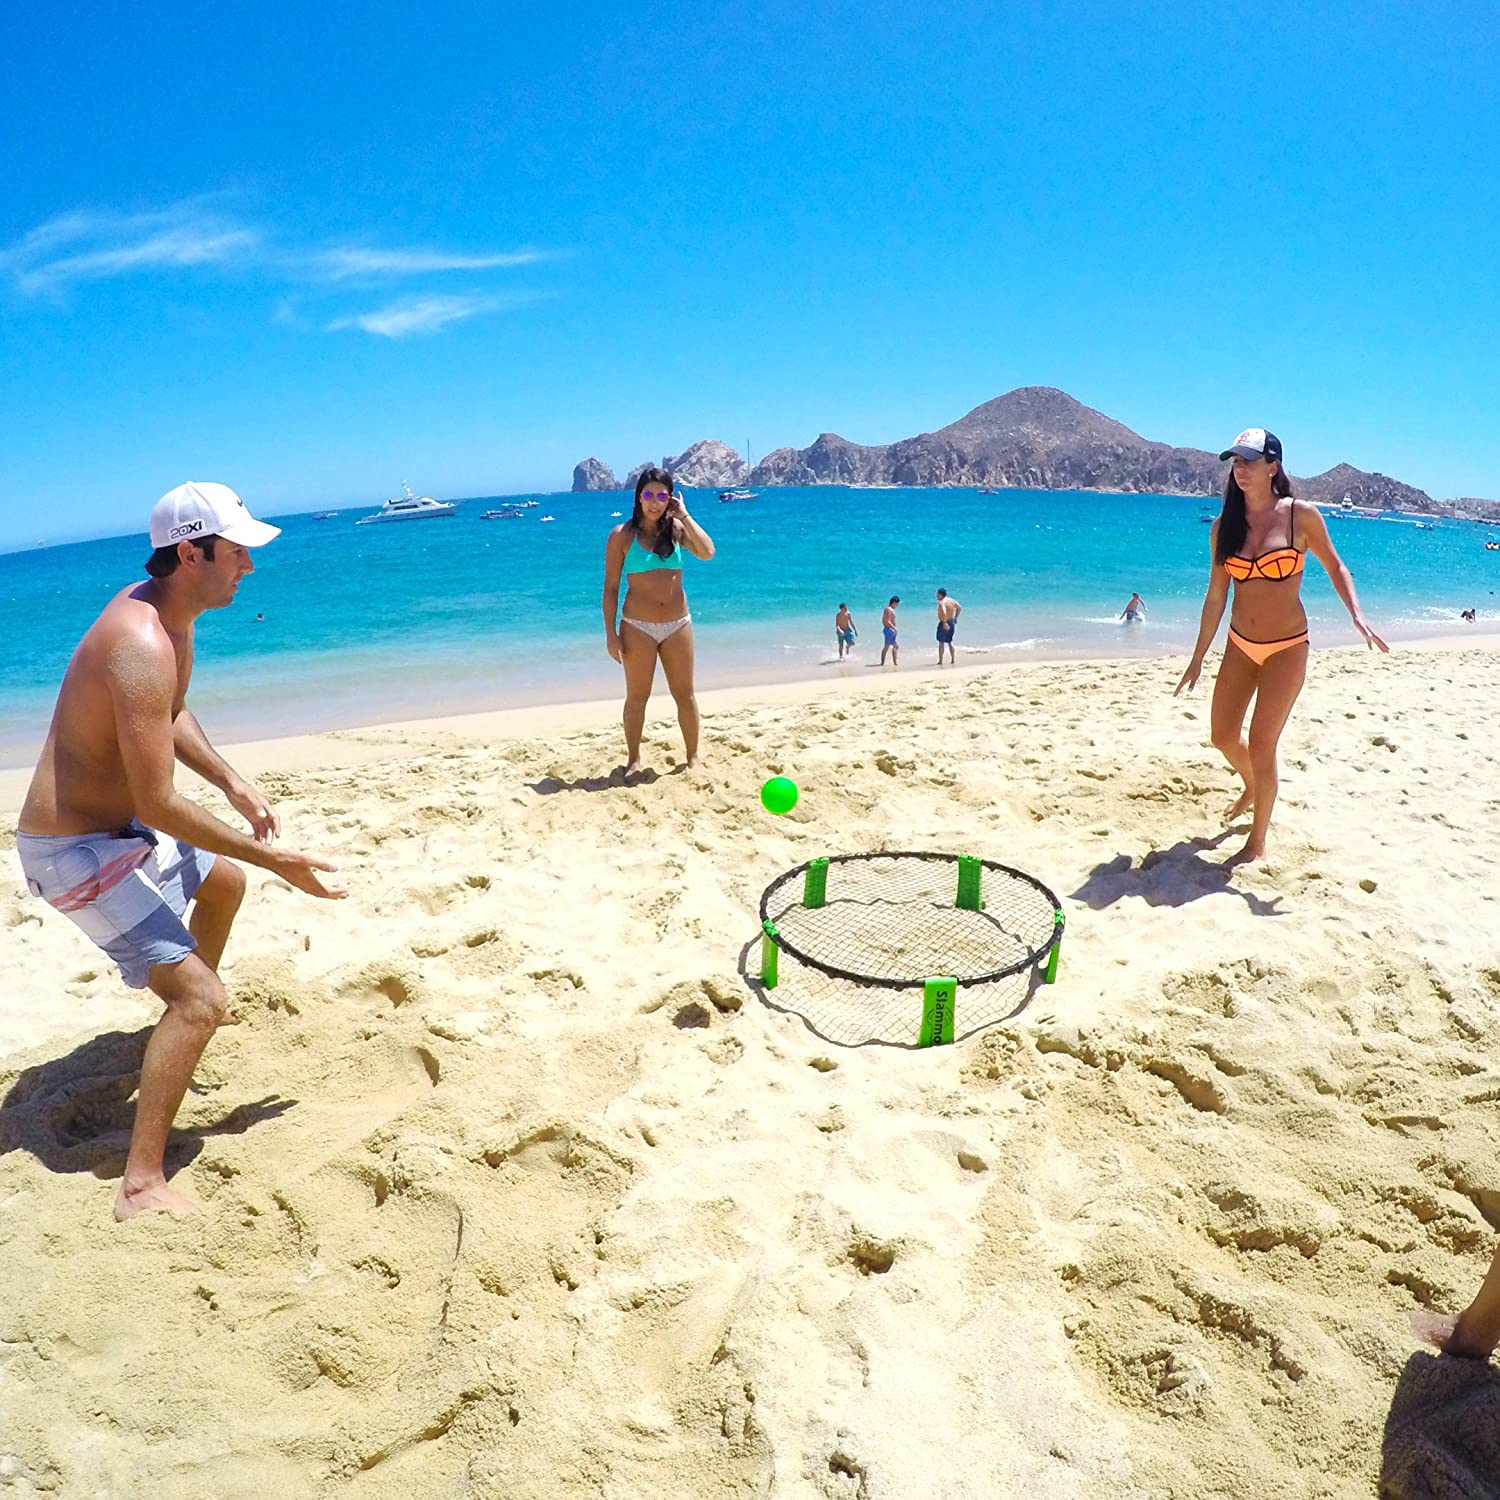 Beach & Tailgating Roundnet Game